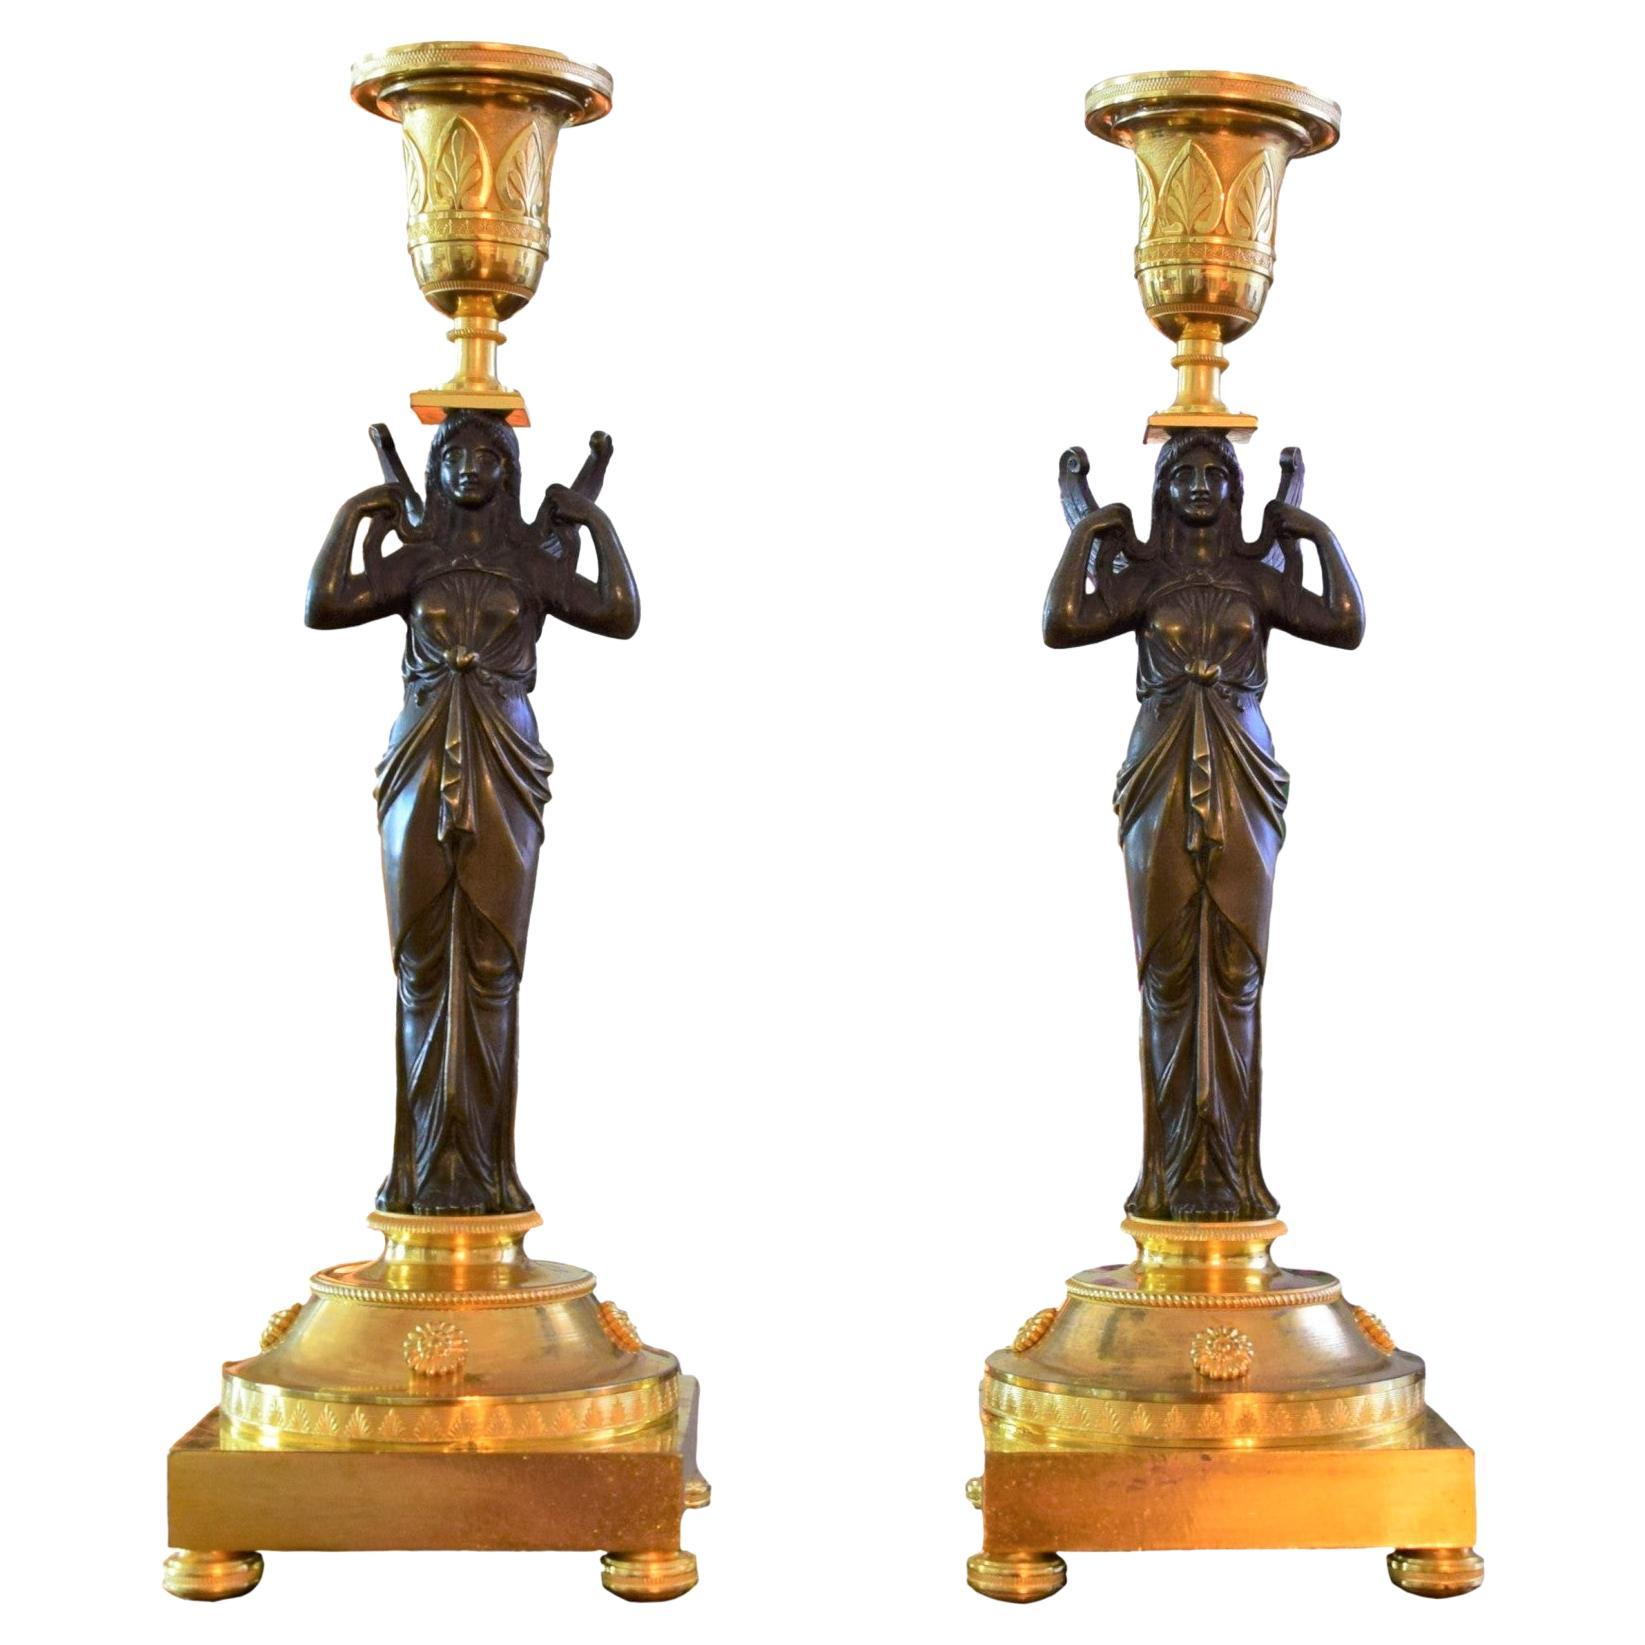 Elegant Pair of Gilt and Patinated Bronze French 1st Empire Candlesticks